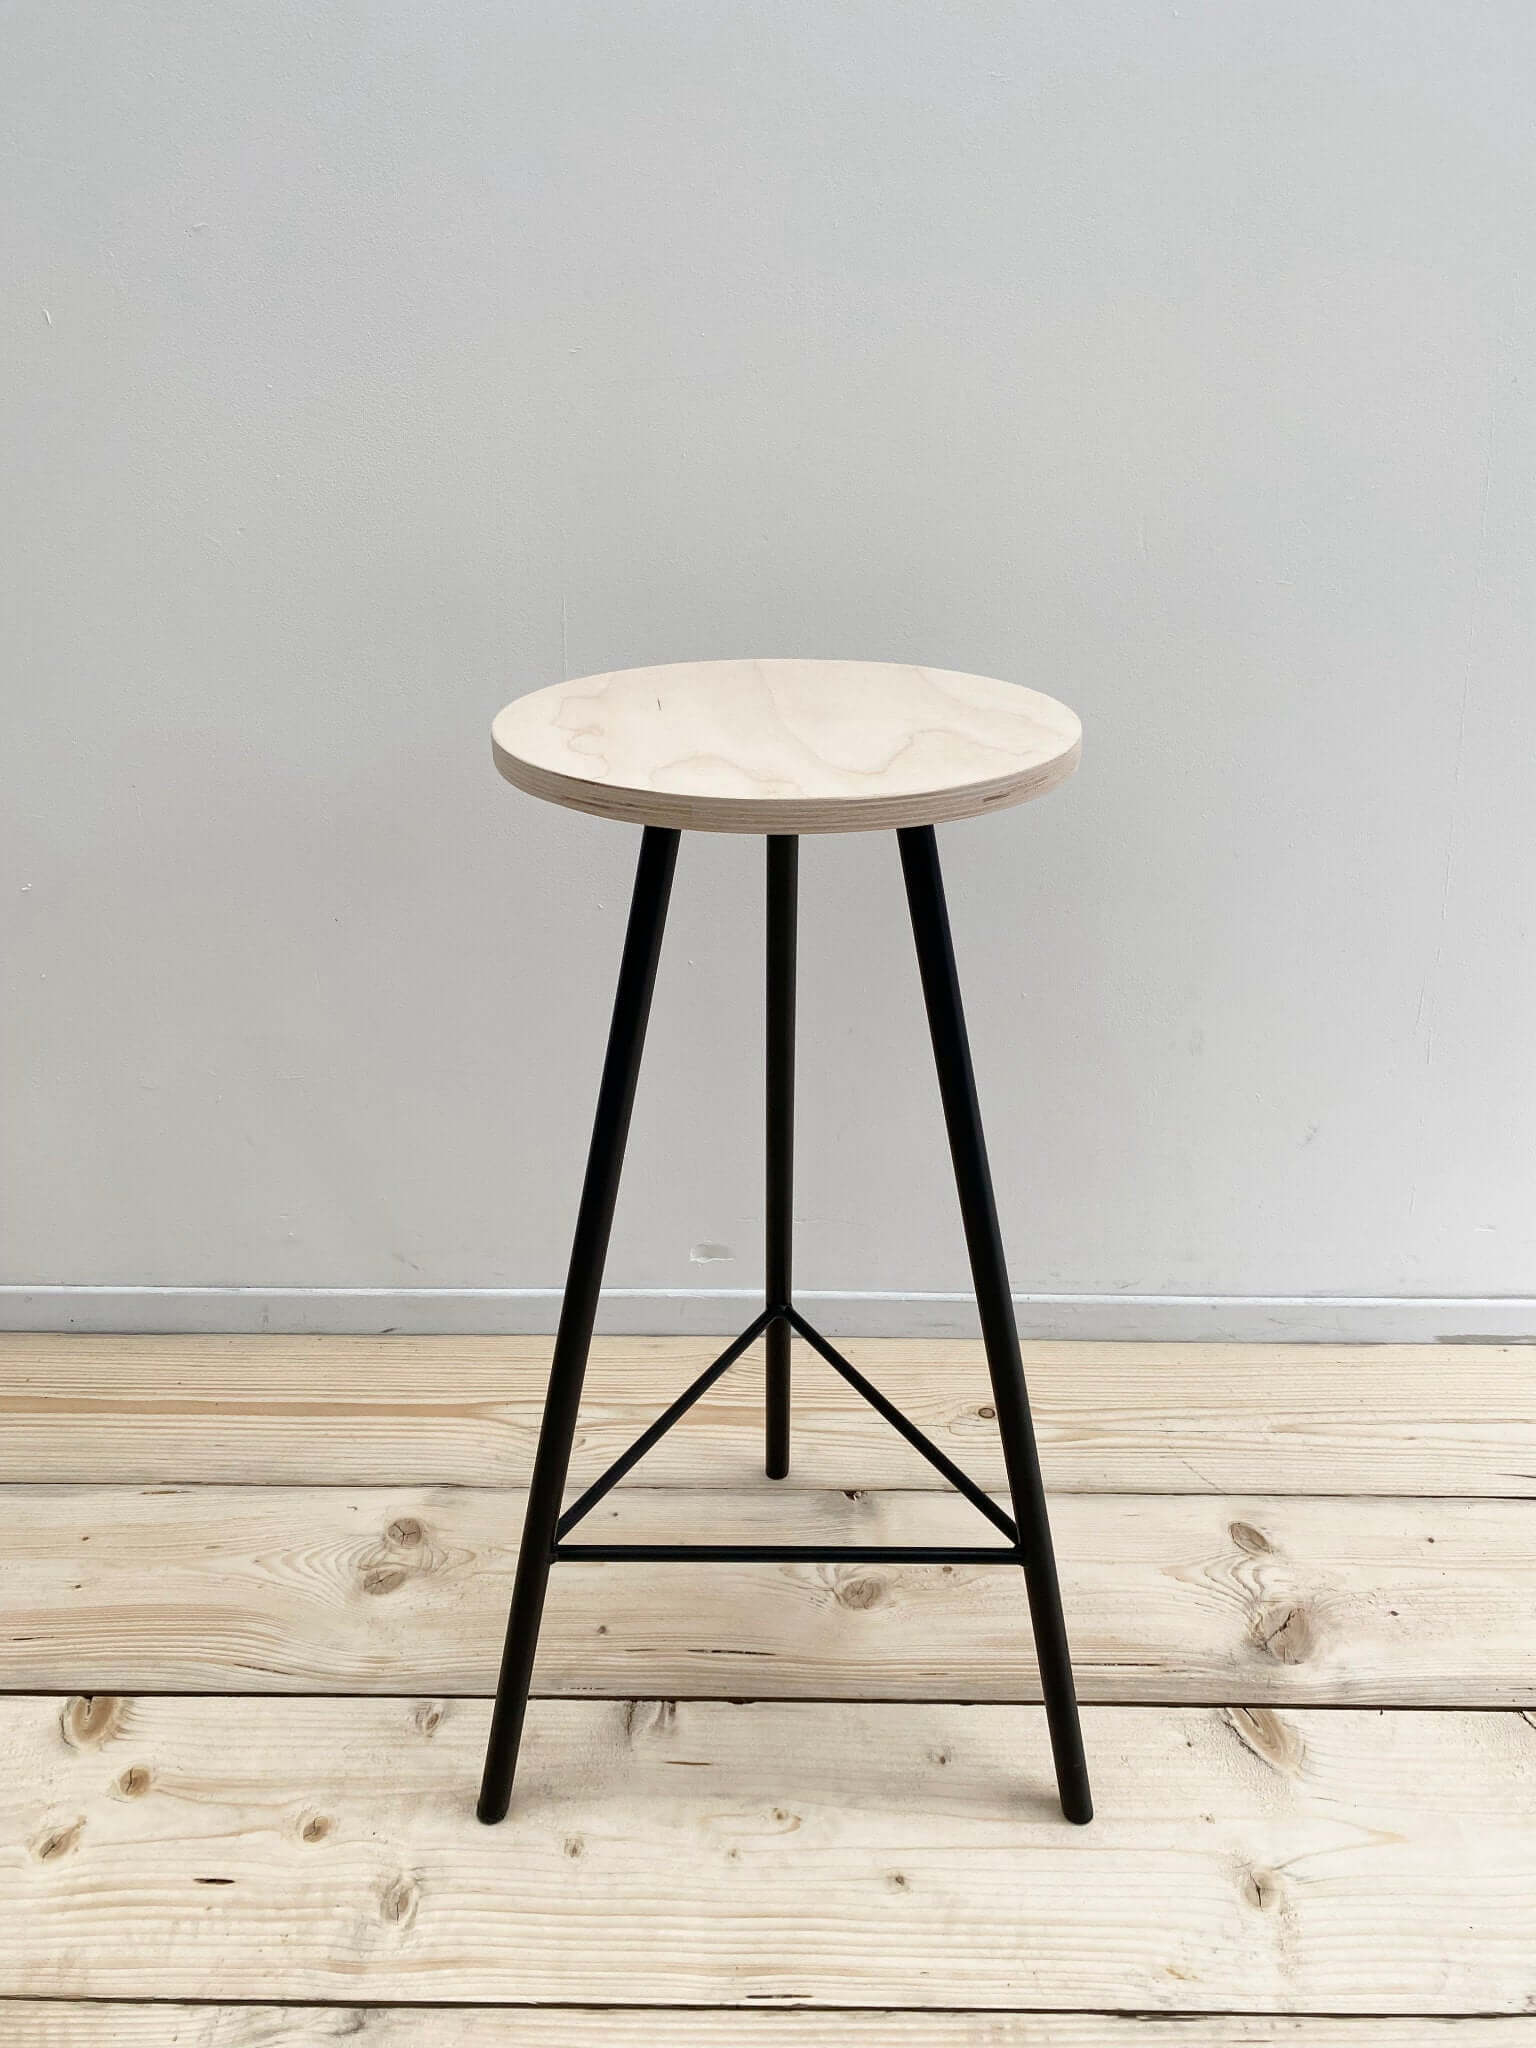 Repurposed wood stool with optional base.